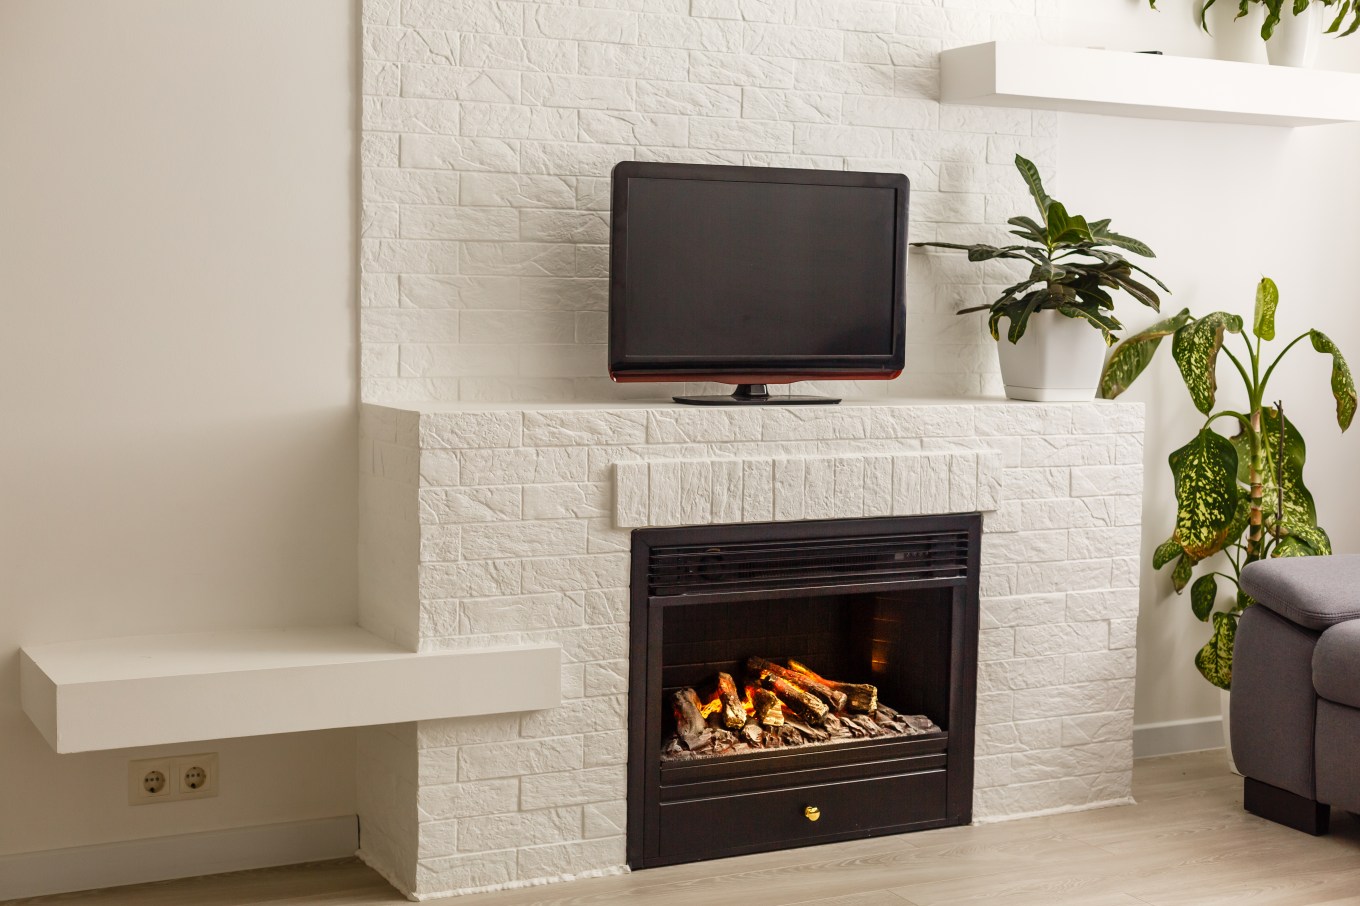 A modern fireplace in a contemporary, white-walled room with a TV above the fireplace.